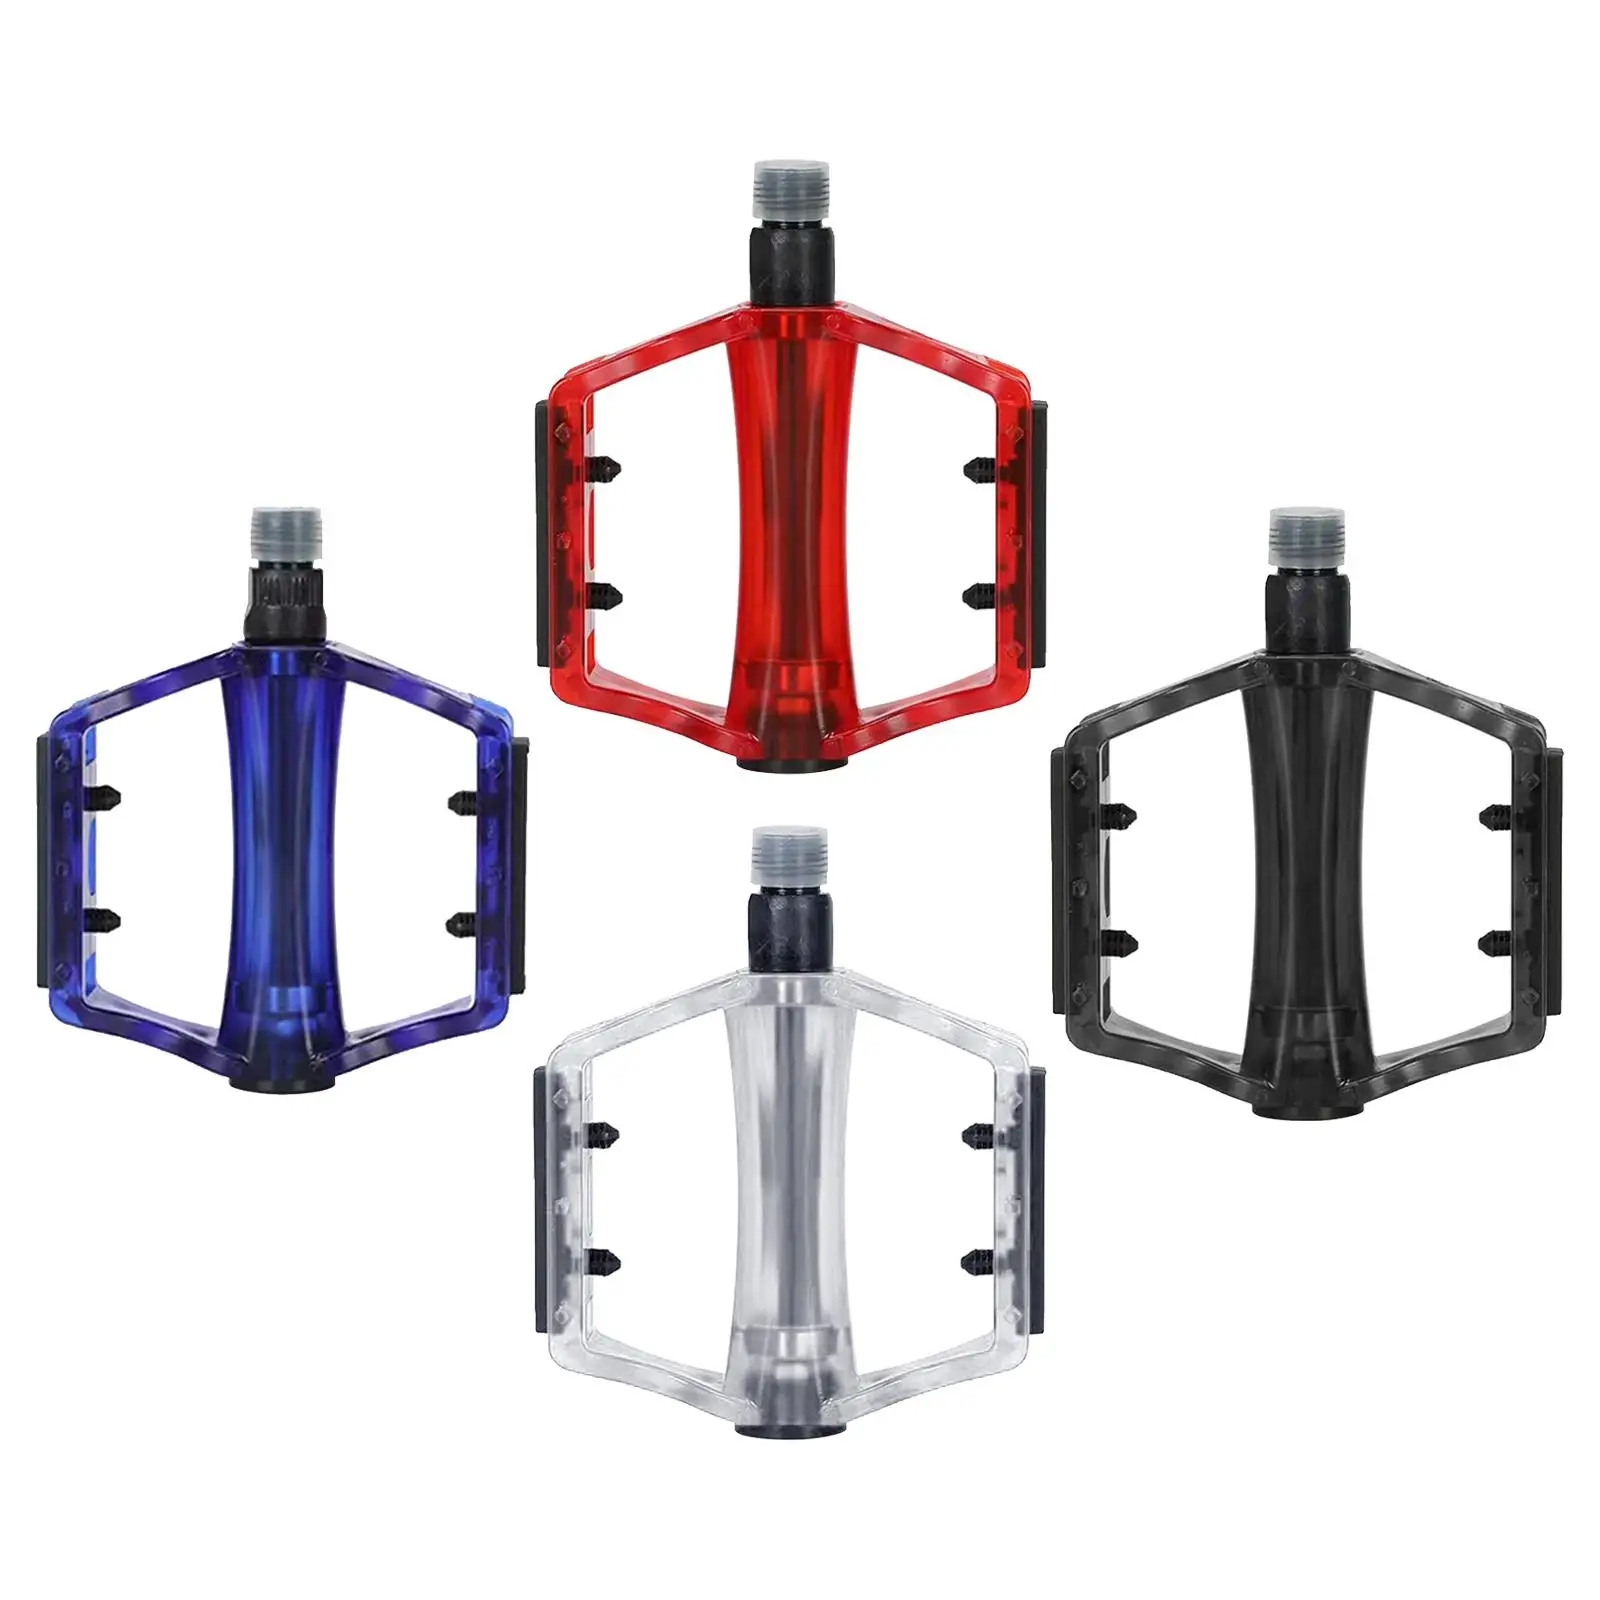 2x Bike Pedals Bicycle Pedals Durable Lightweight Sealed Bearings Parts for Folding Bike Road Bike Adult Bikes Replacement